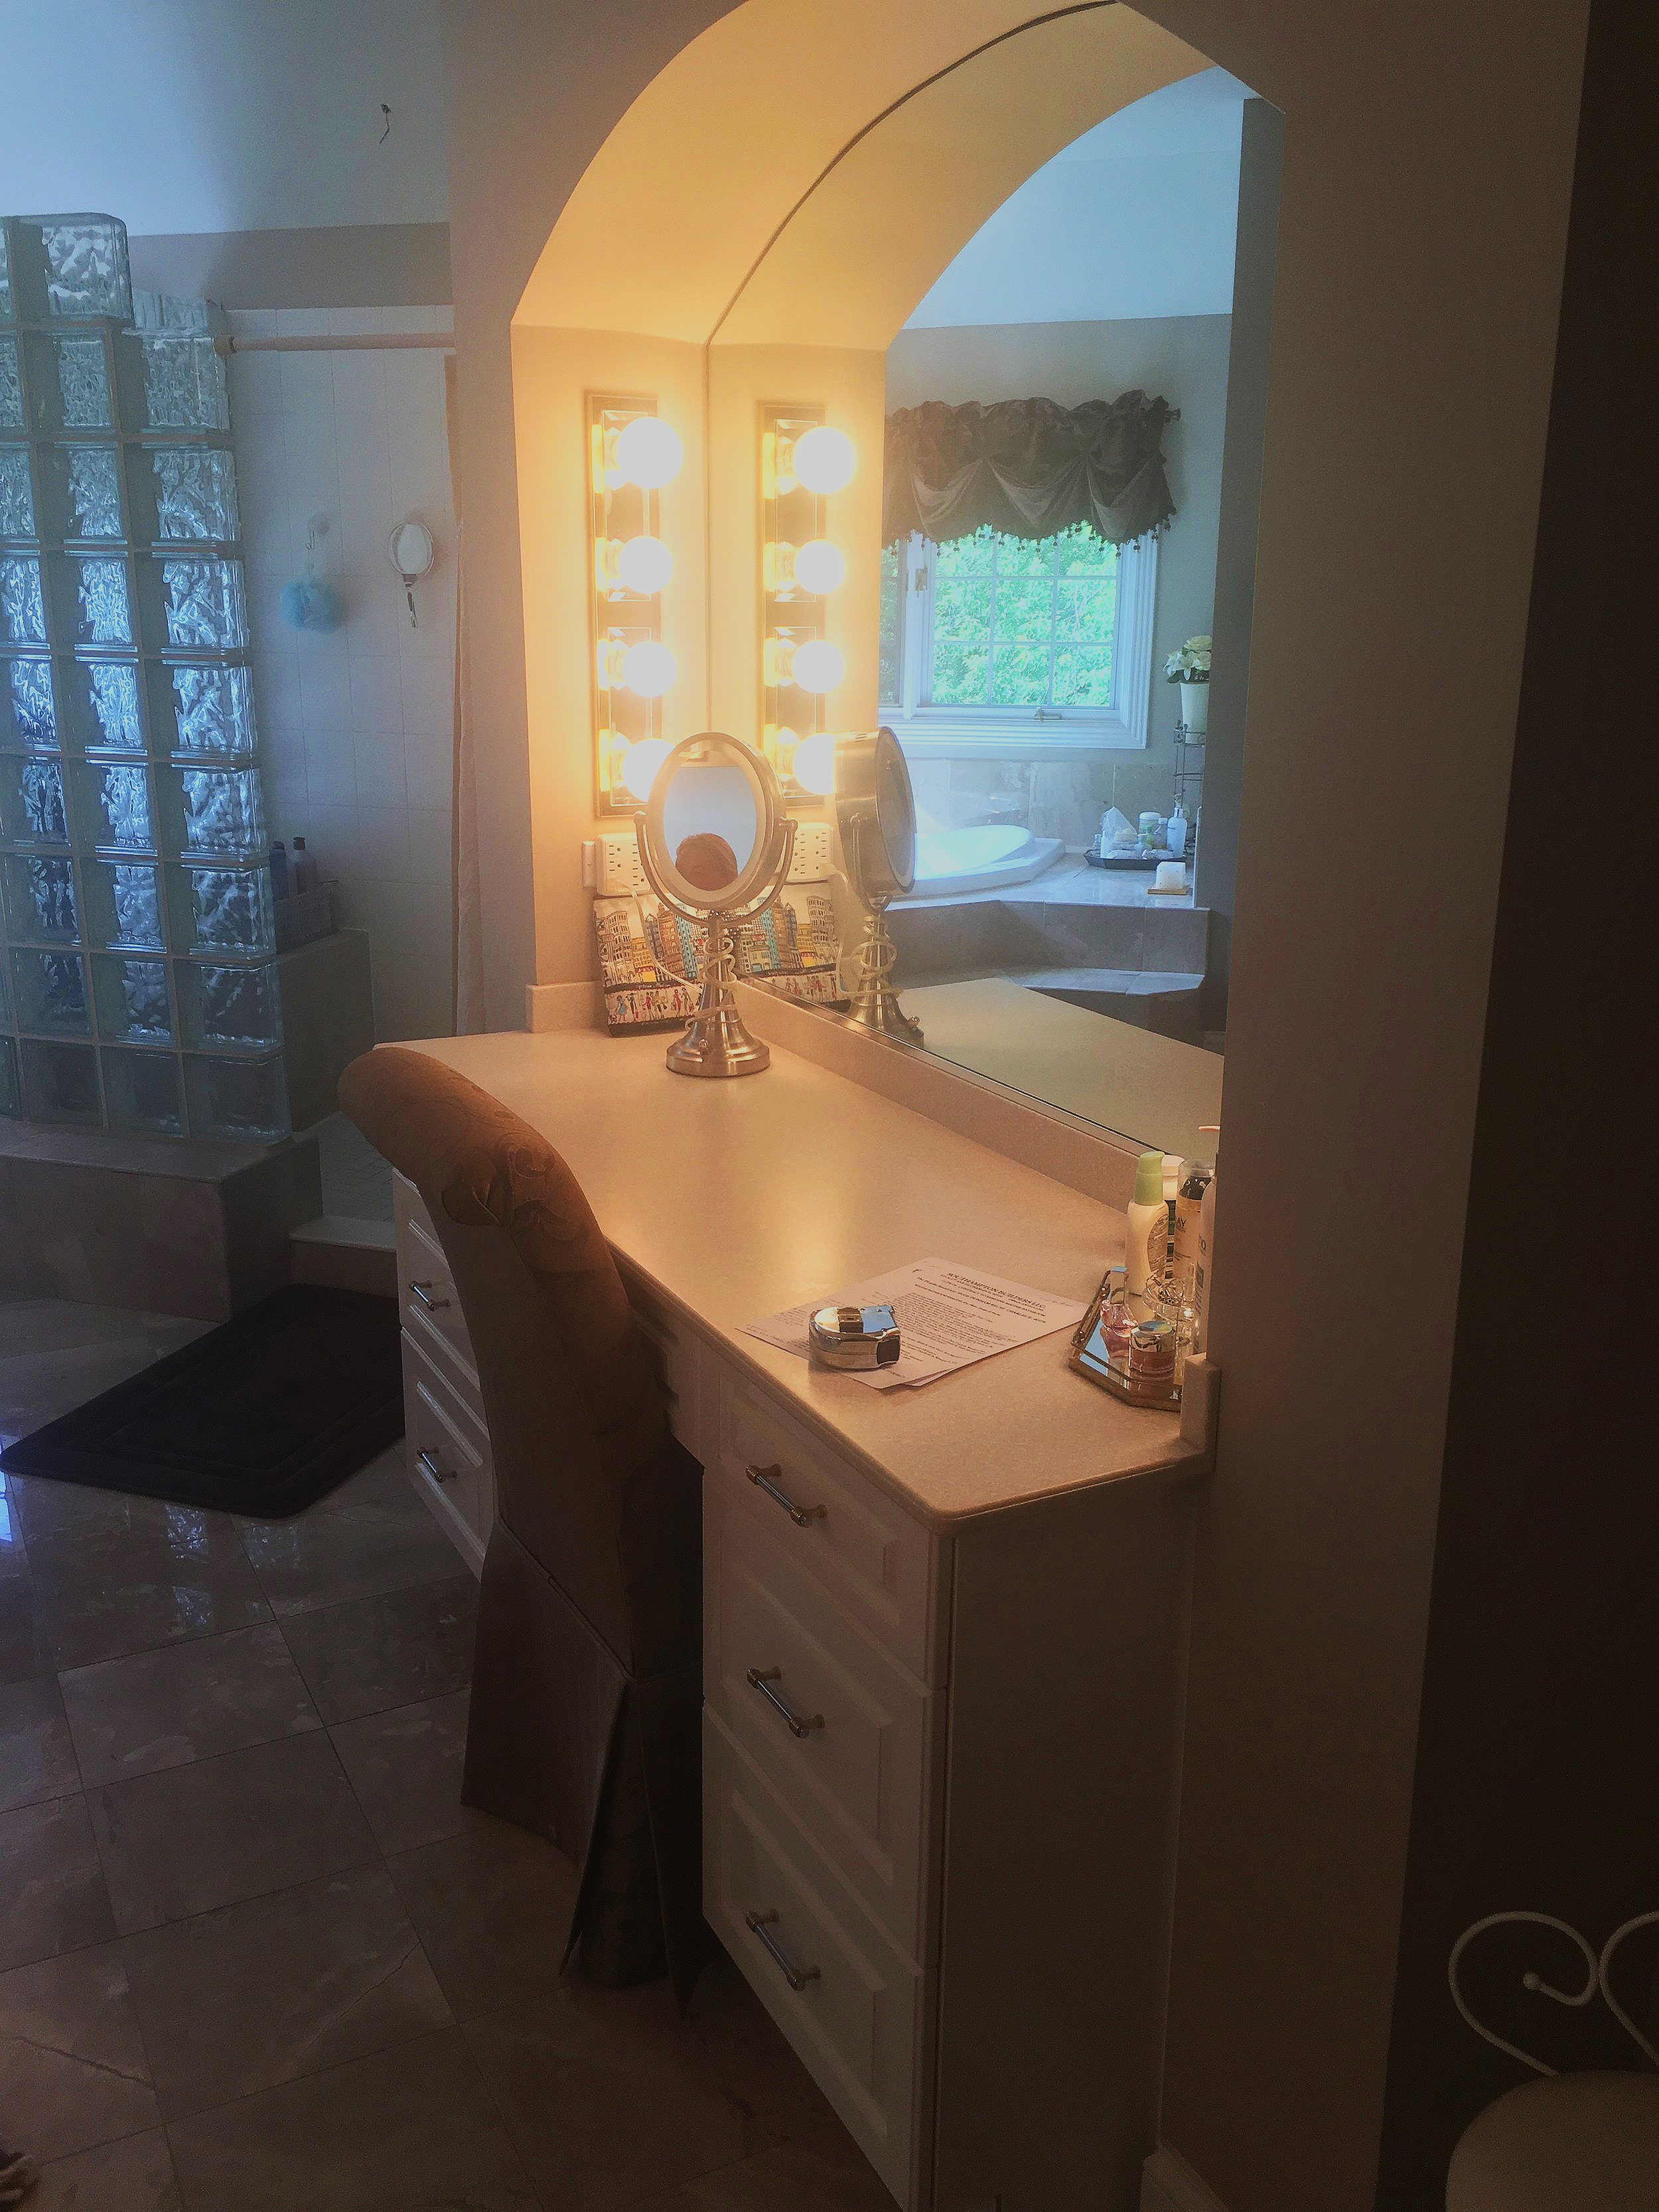 BEFORE &amp; AFTER PHOTOS OF NAPERVILLE IL MAKE UP AREA REMODEL IN LARGE CUSTOM HOME MASTER BATHROOM